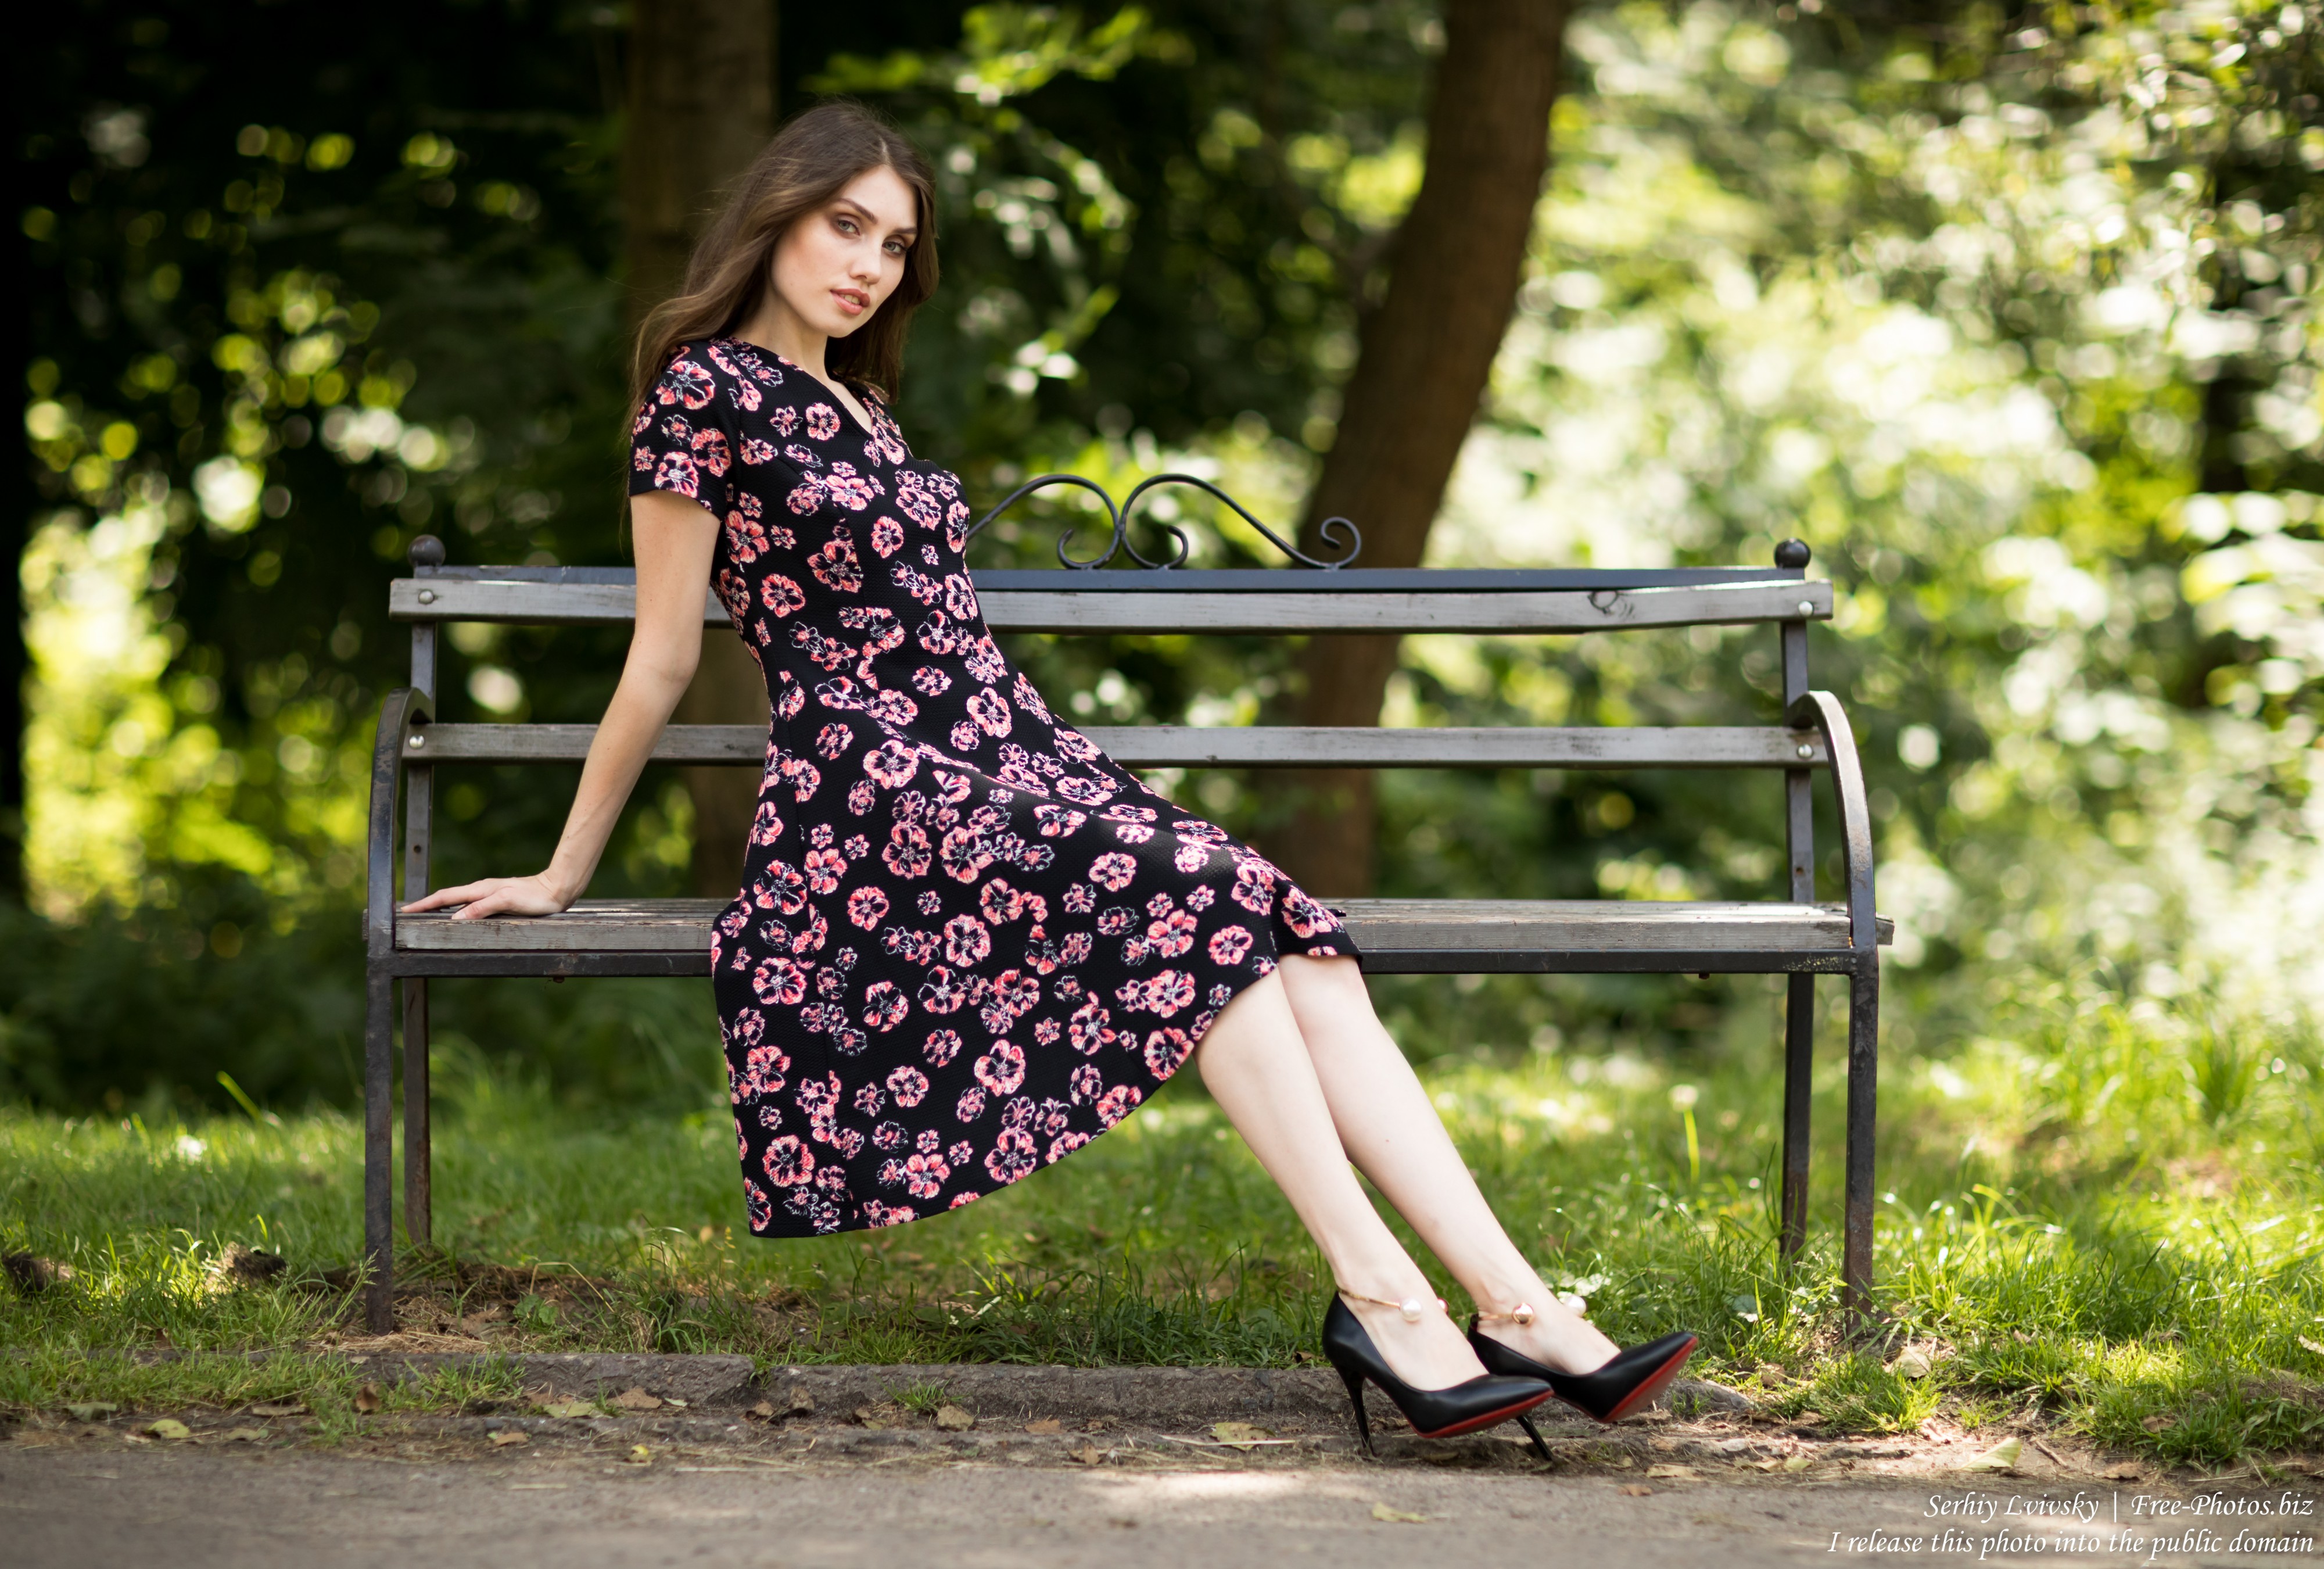 Natalia - a 24-year-old girl photographed in July 2019 by Serhiy Lvivsky, picture 39